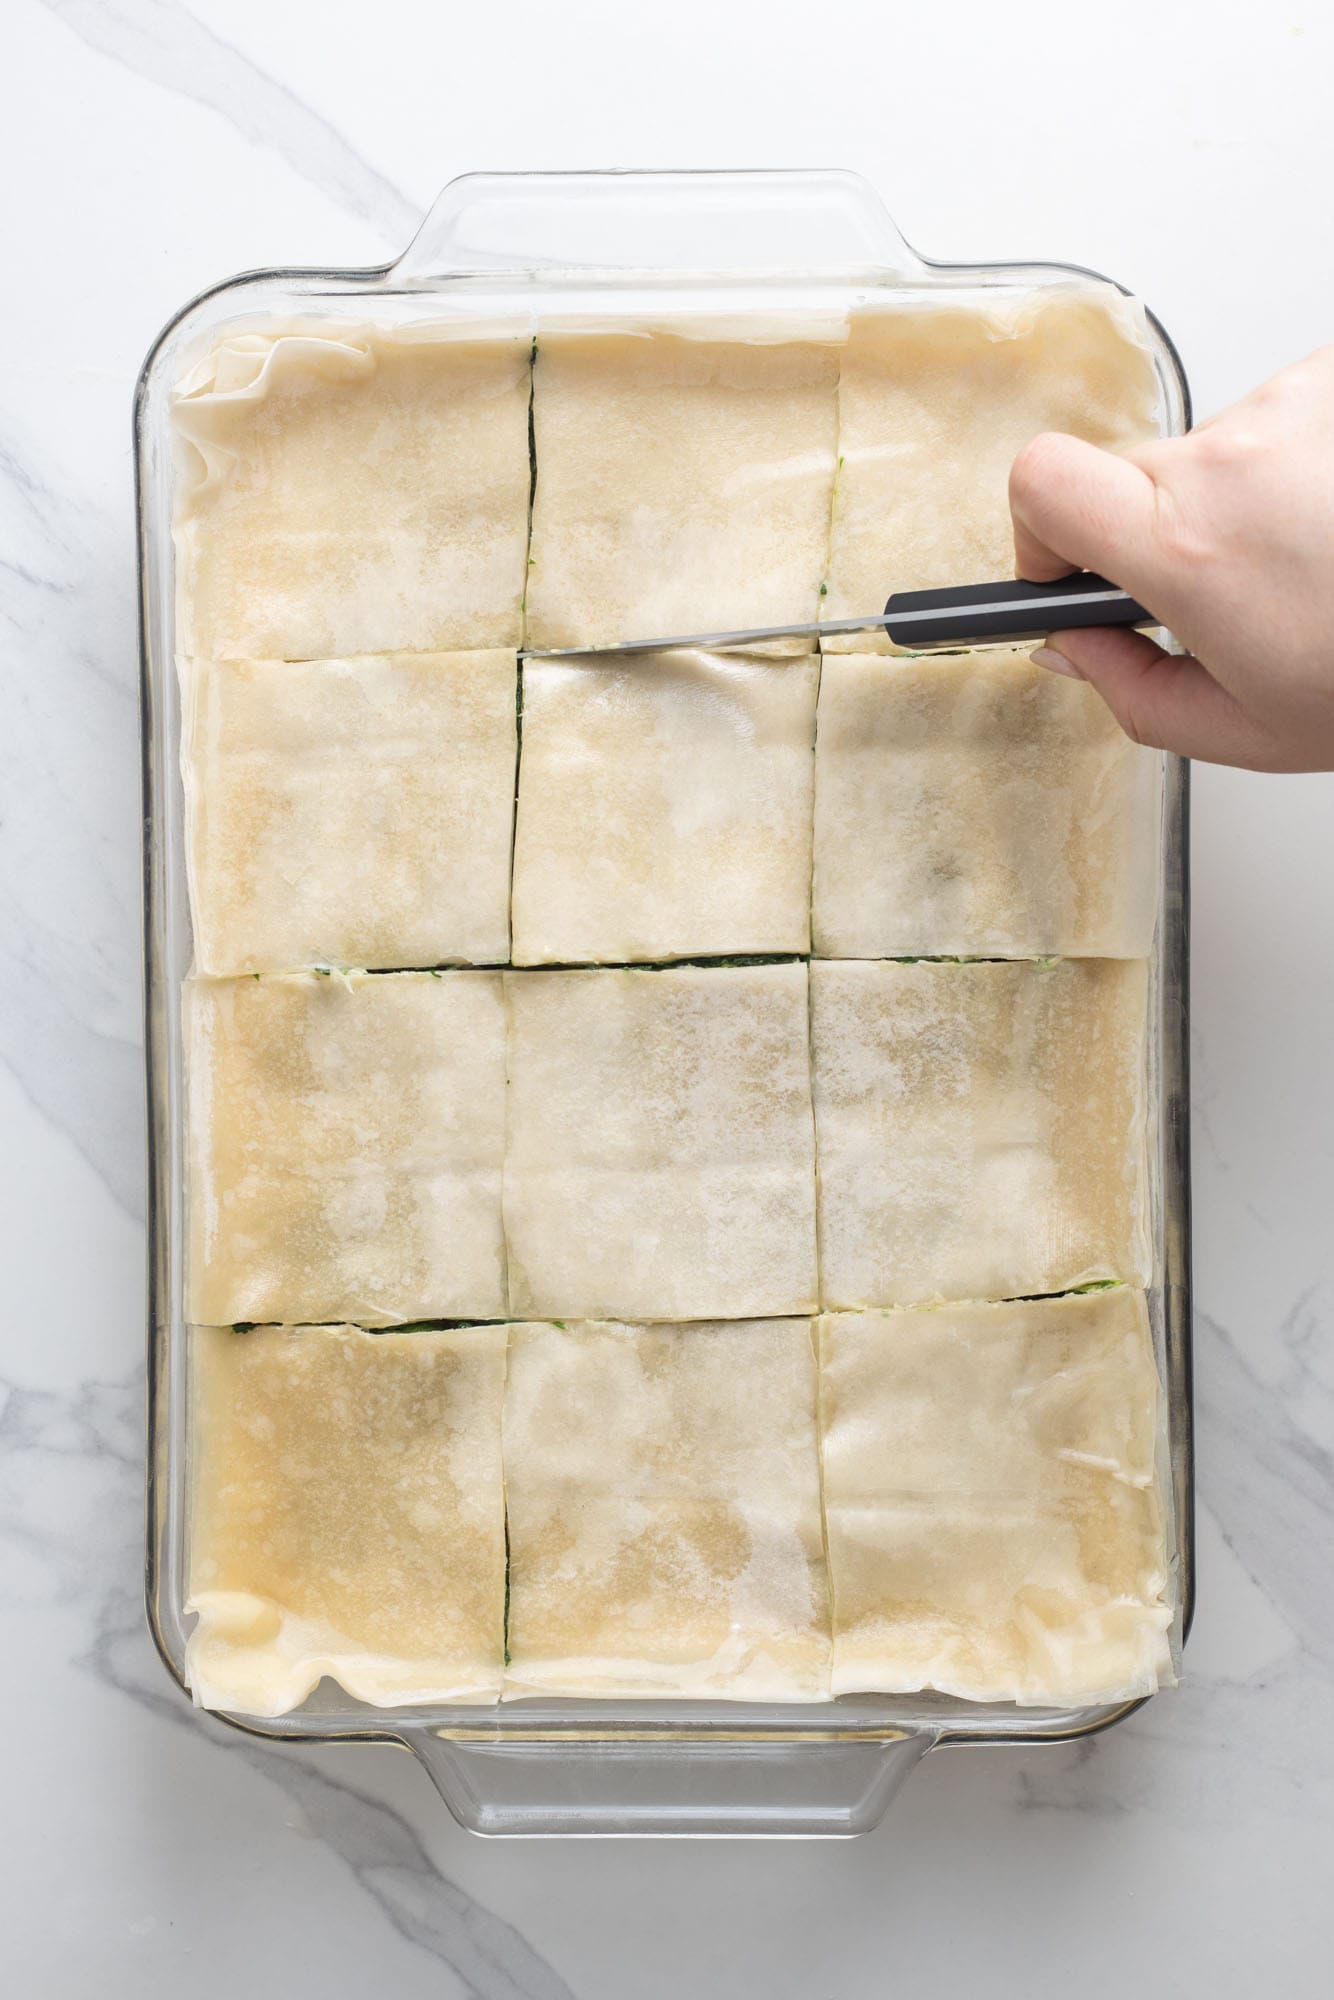 a hand using a knife to cute spanakopita into squares